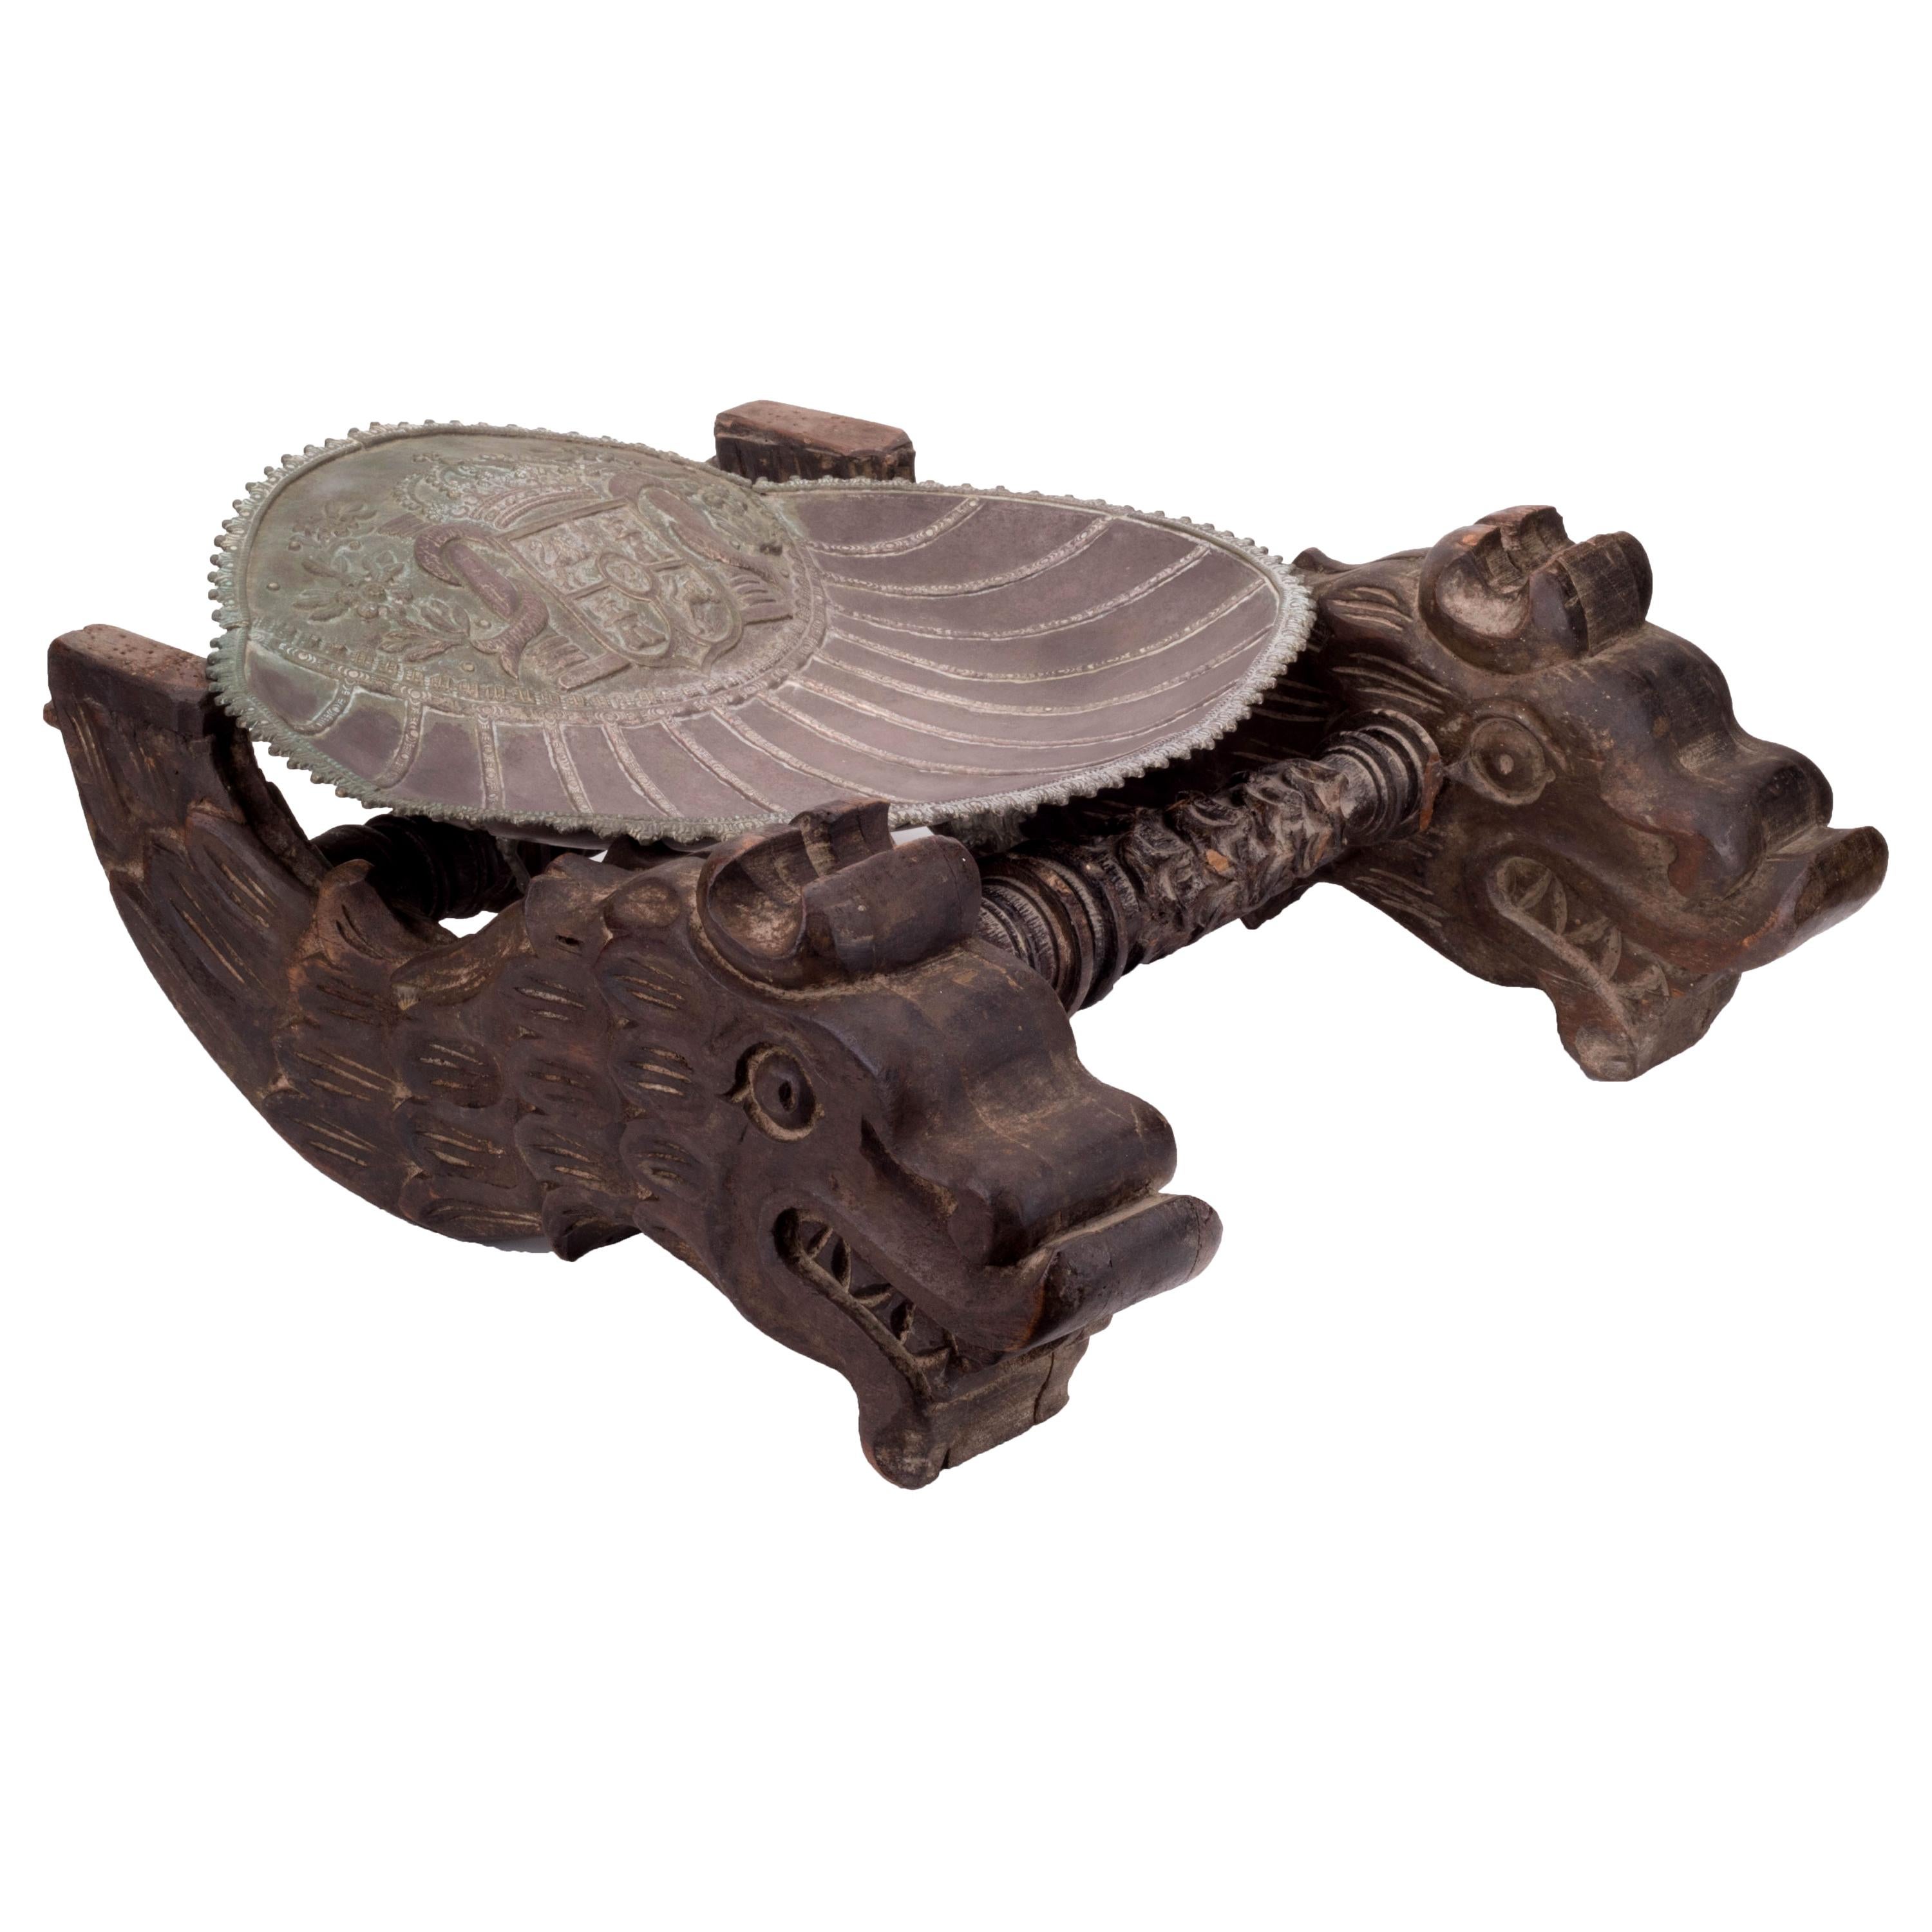 Silver Conch with the Castile and León Coat of Arms on a Carved Wood Support For Sale